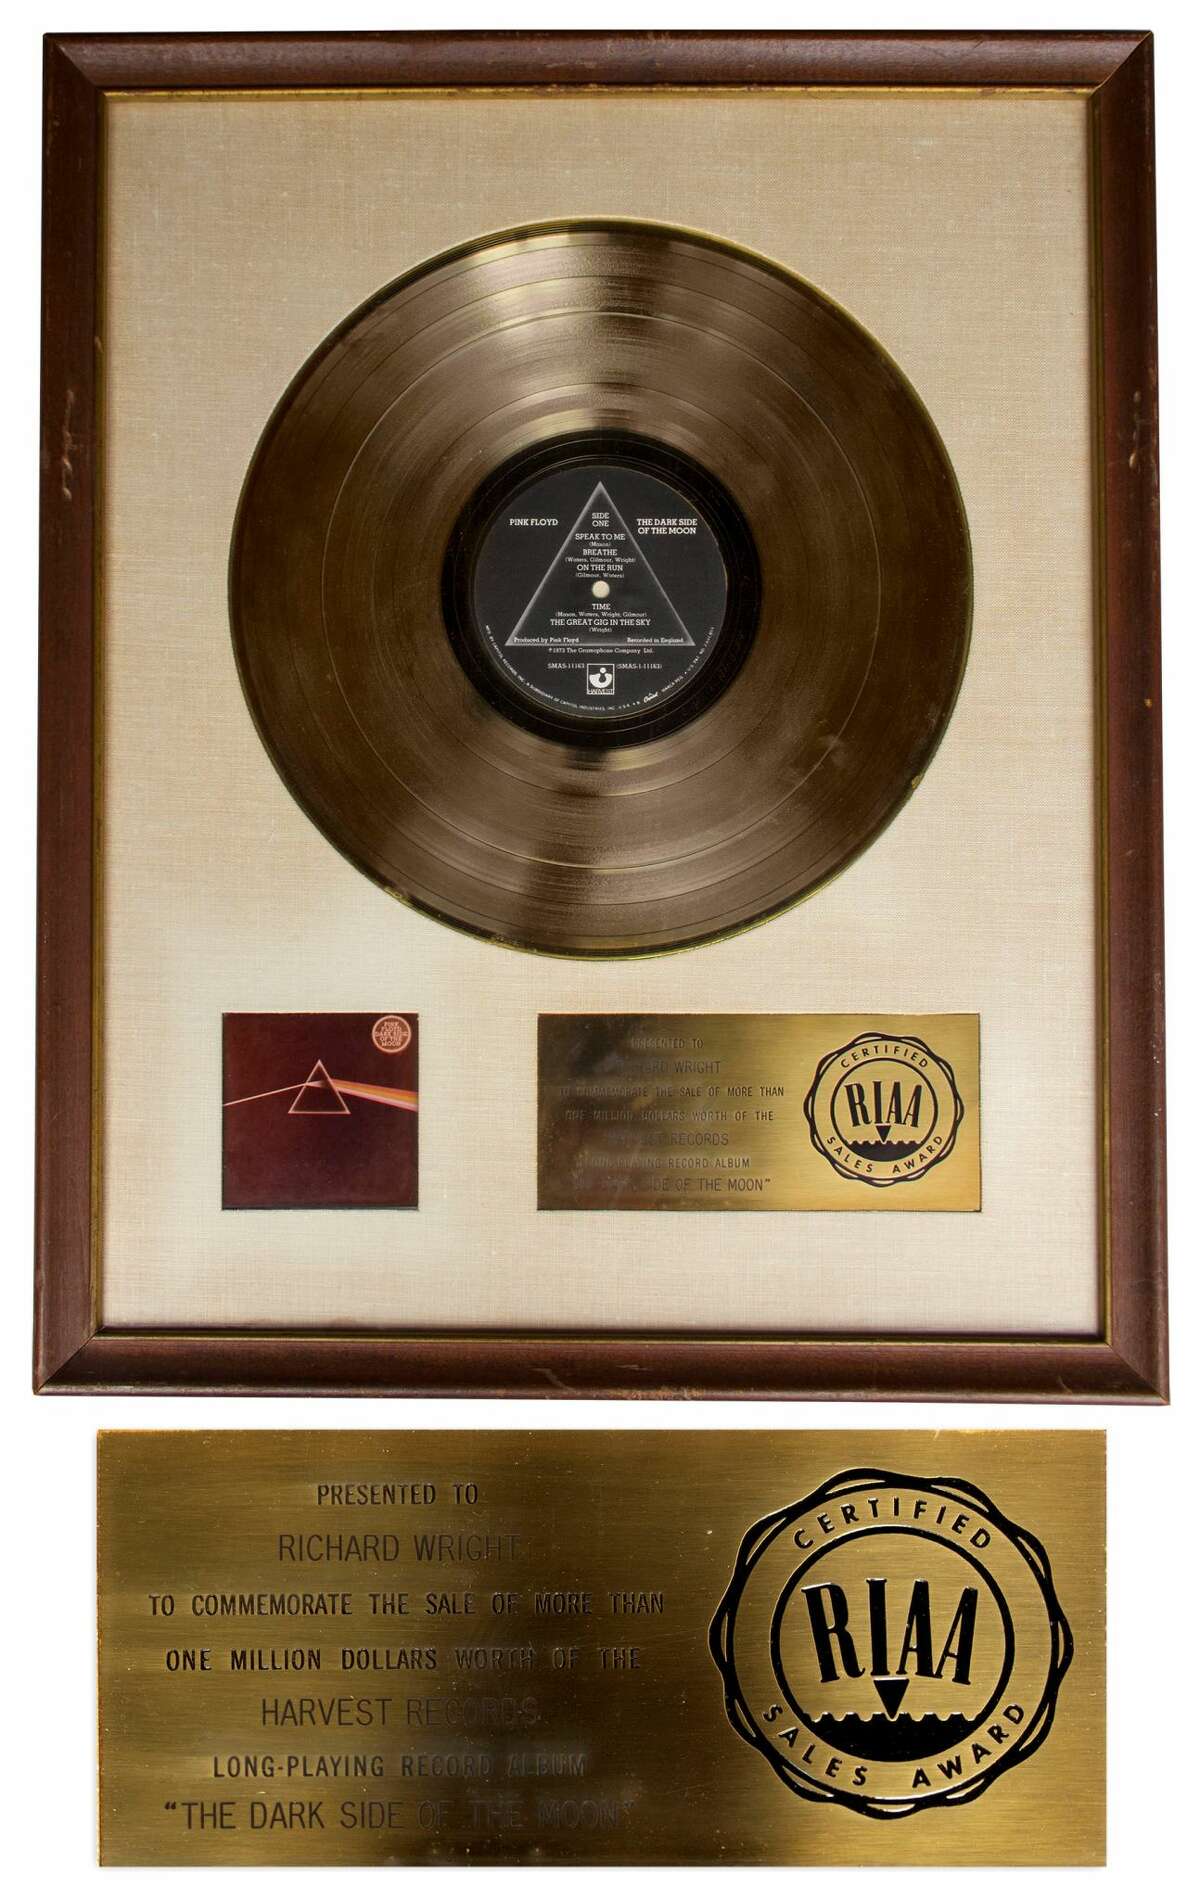 A high bid of $25,000 snared the RIAA gold record for Pink Floyd’s 1973 album “The Dark Side of the Moon” at auction on Thursday, June 22, 2017.